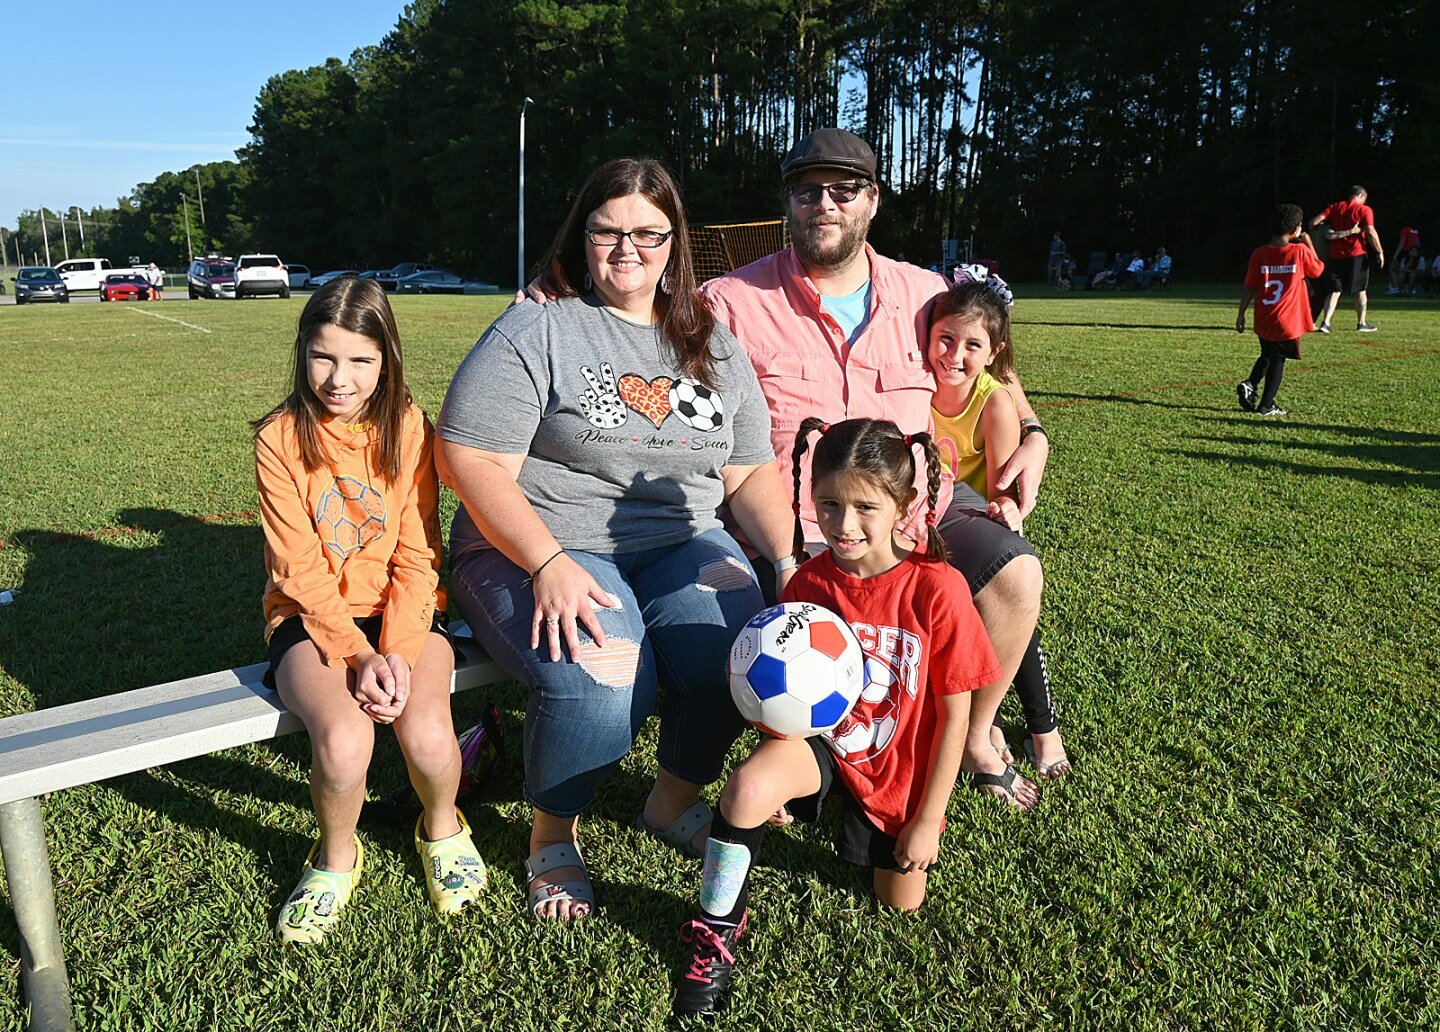 Amanda and Jonathan Price of Orrum attend a soccer game with their three daughters.